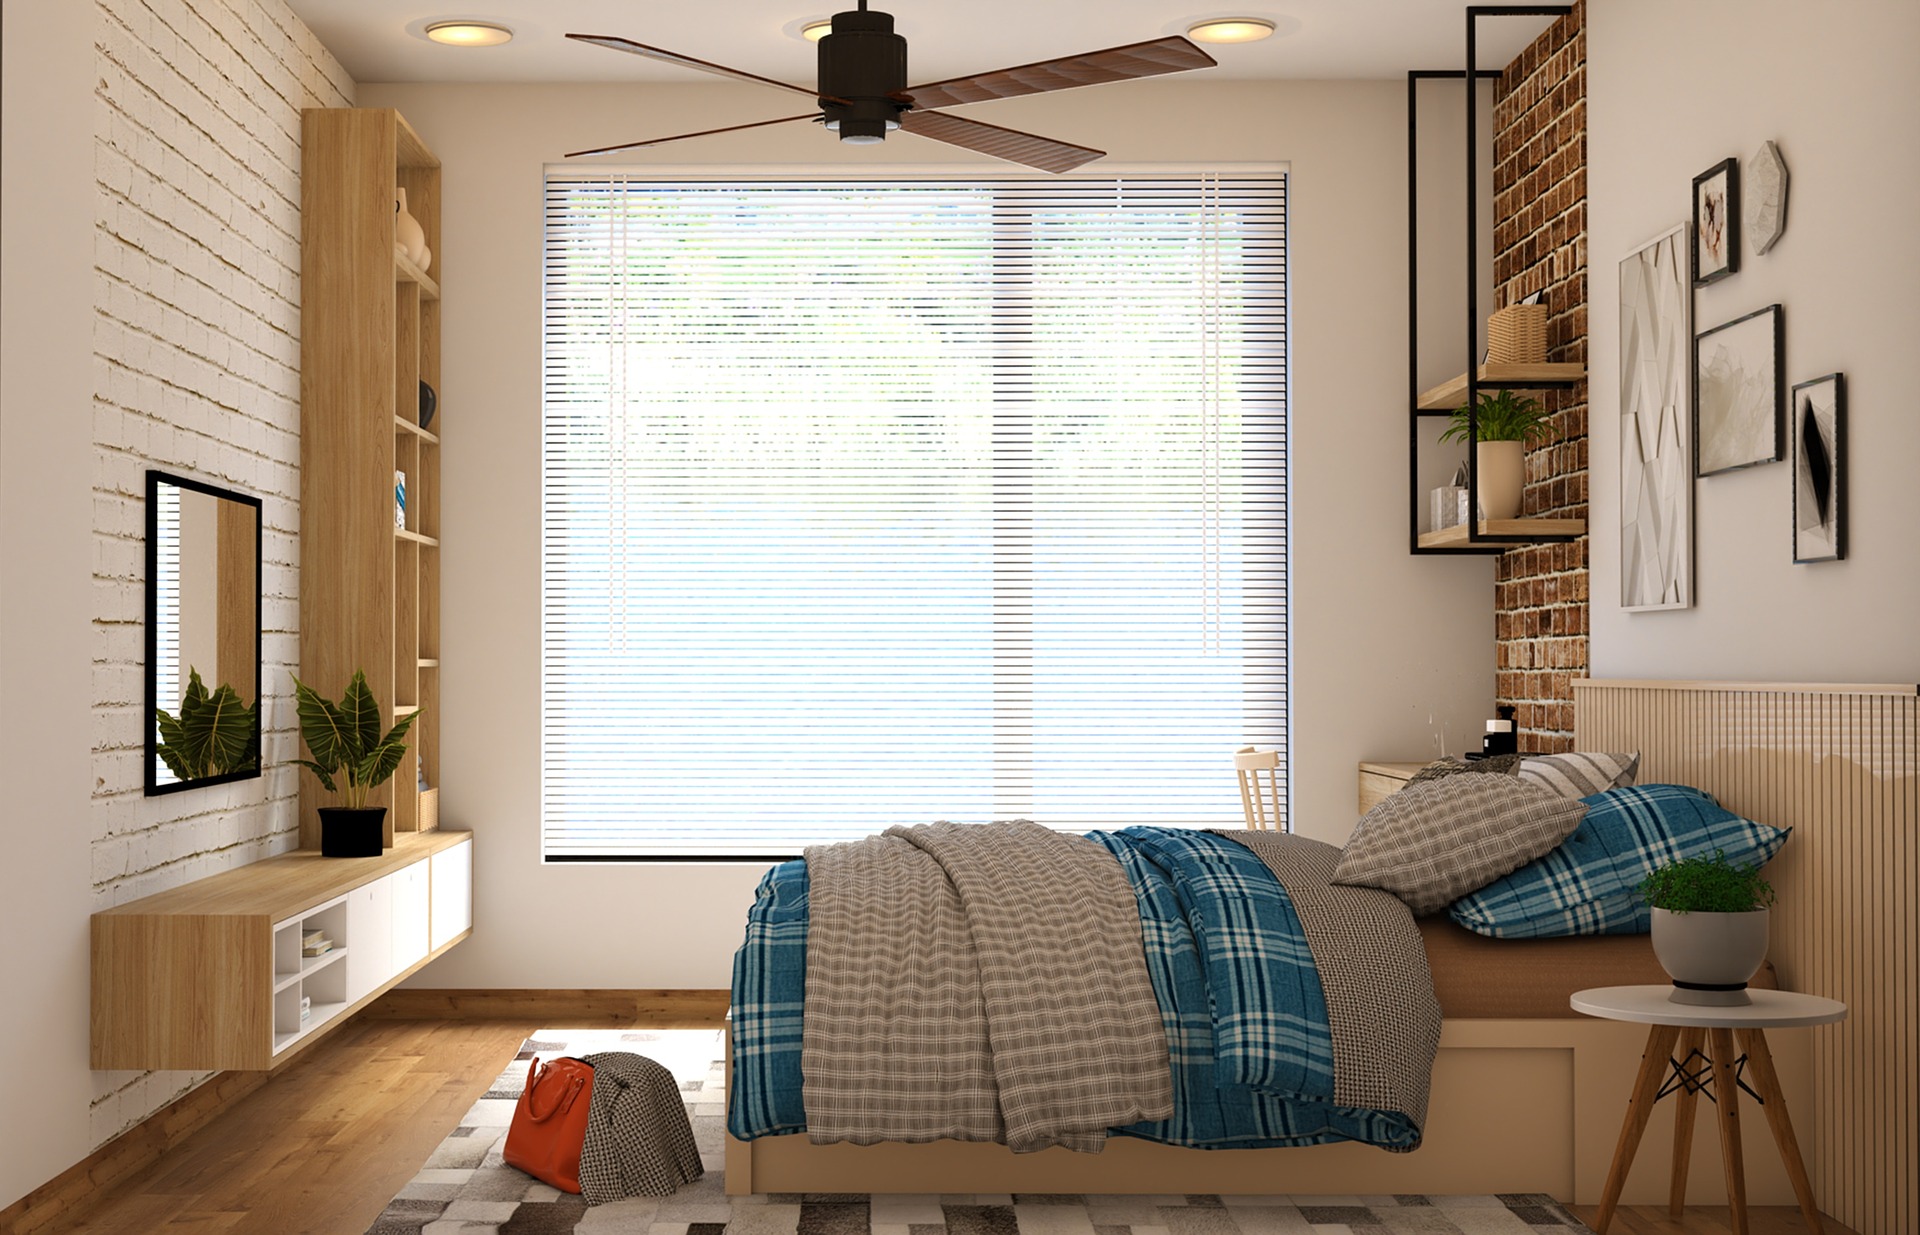 Bedroom with blinds at window and ceiling fan.